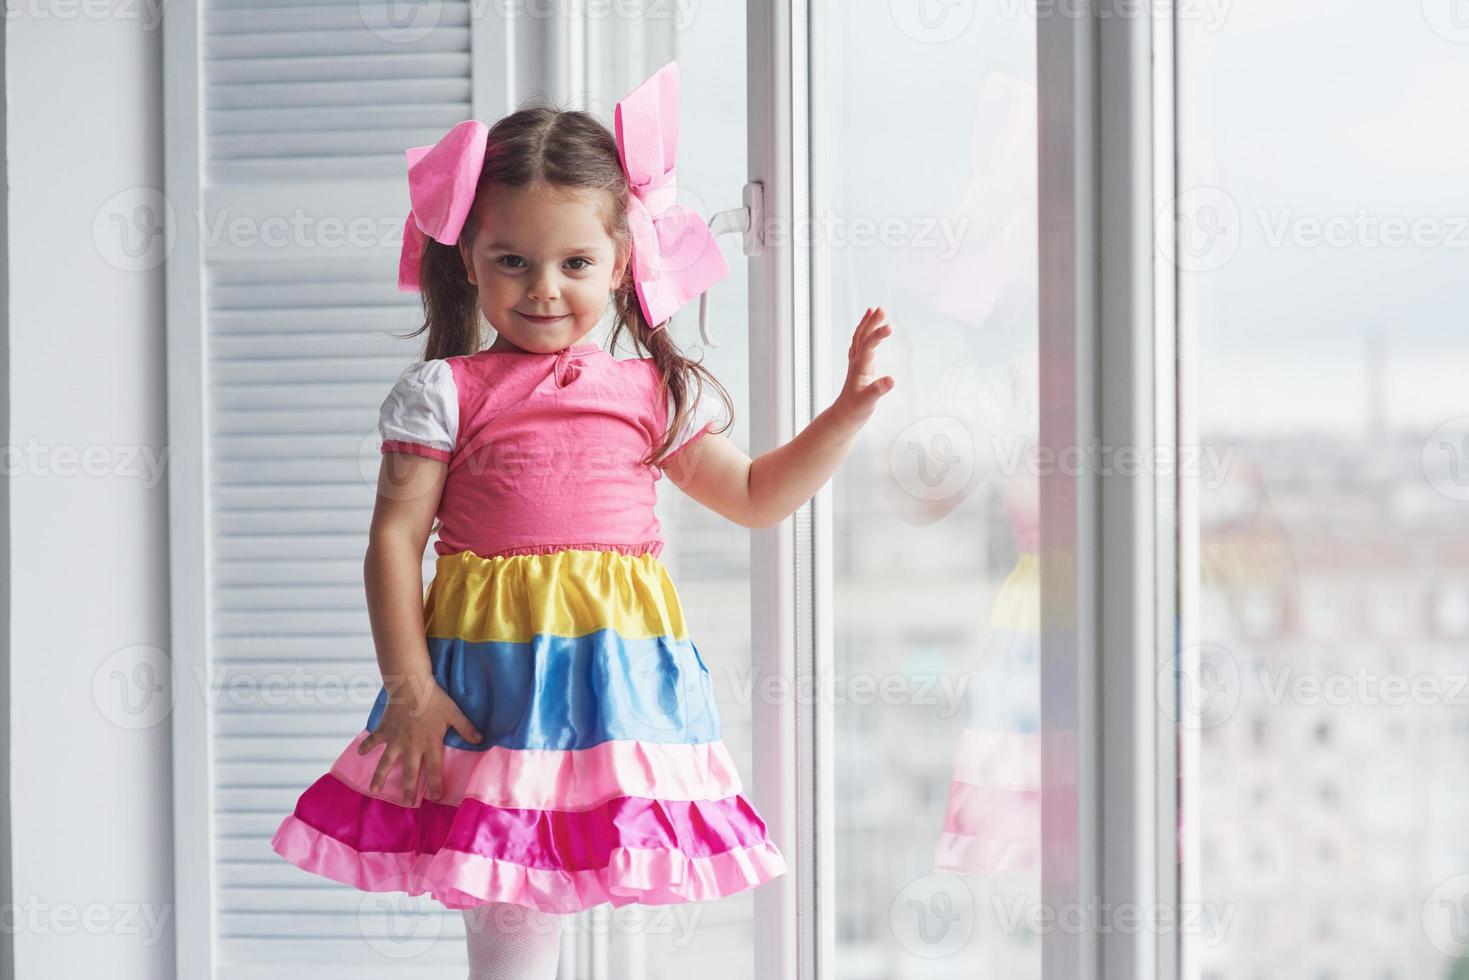 Girl in the colorful dress touching the window glass and looking into the camera photo